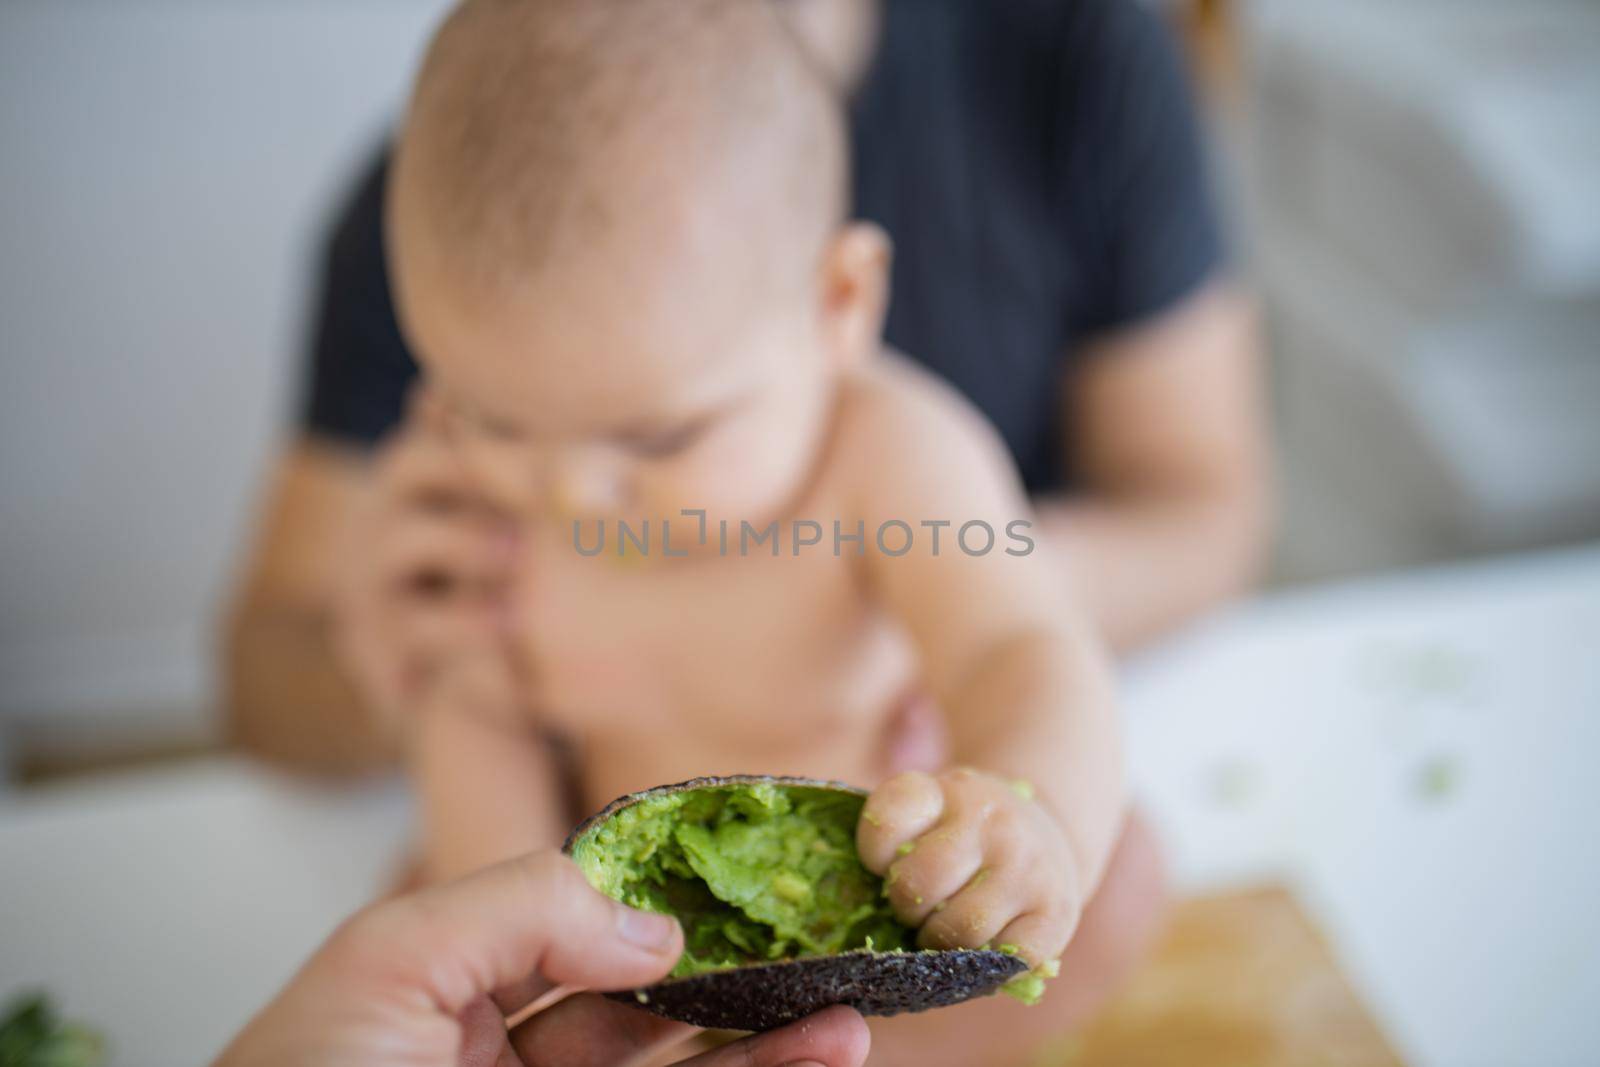 Adorable baby sitting on a table and holding an avocado peel by Kanelbulle